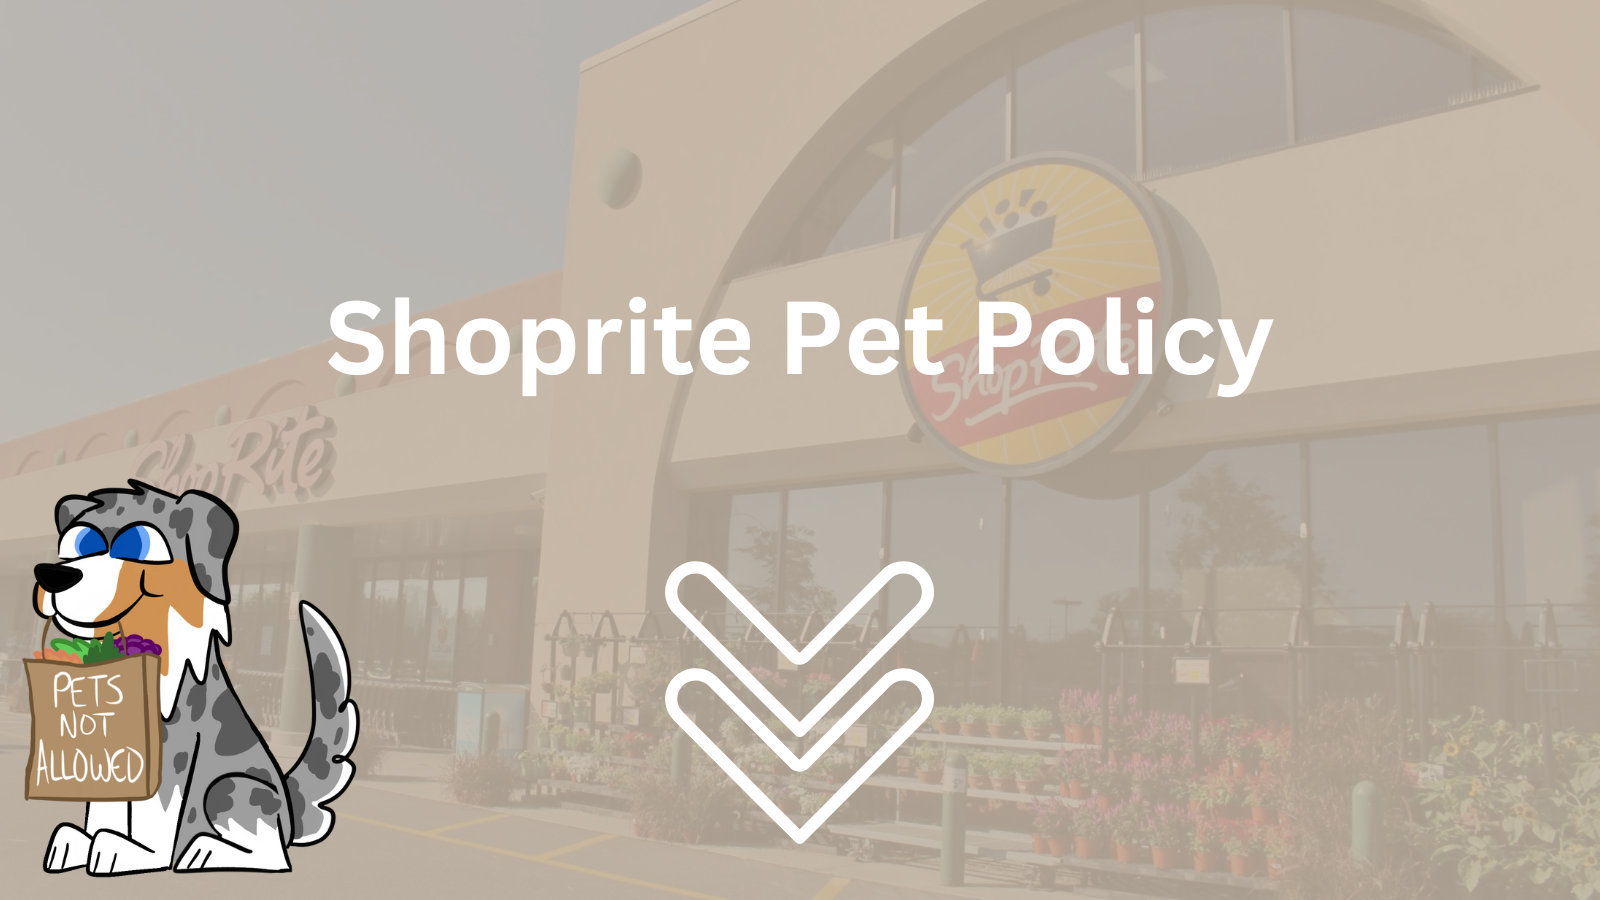 Image Text: "Shoprite Pet Policy"